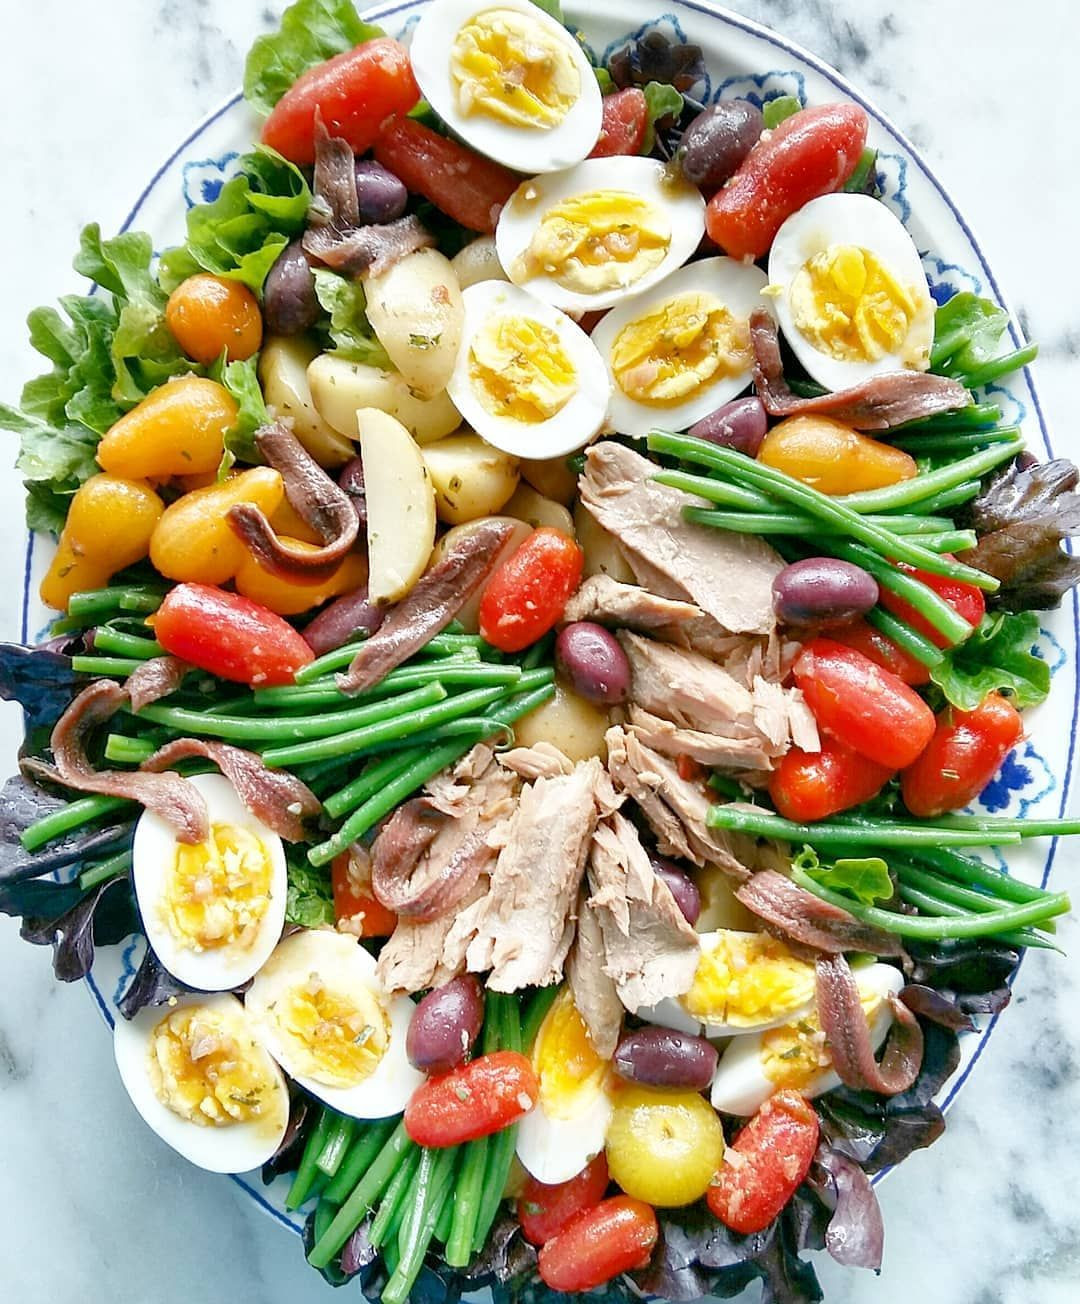 French Salad Recipes Julia Child
 Salad Niçoise from Mastering the Art of French Cooking